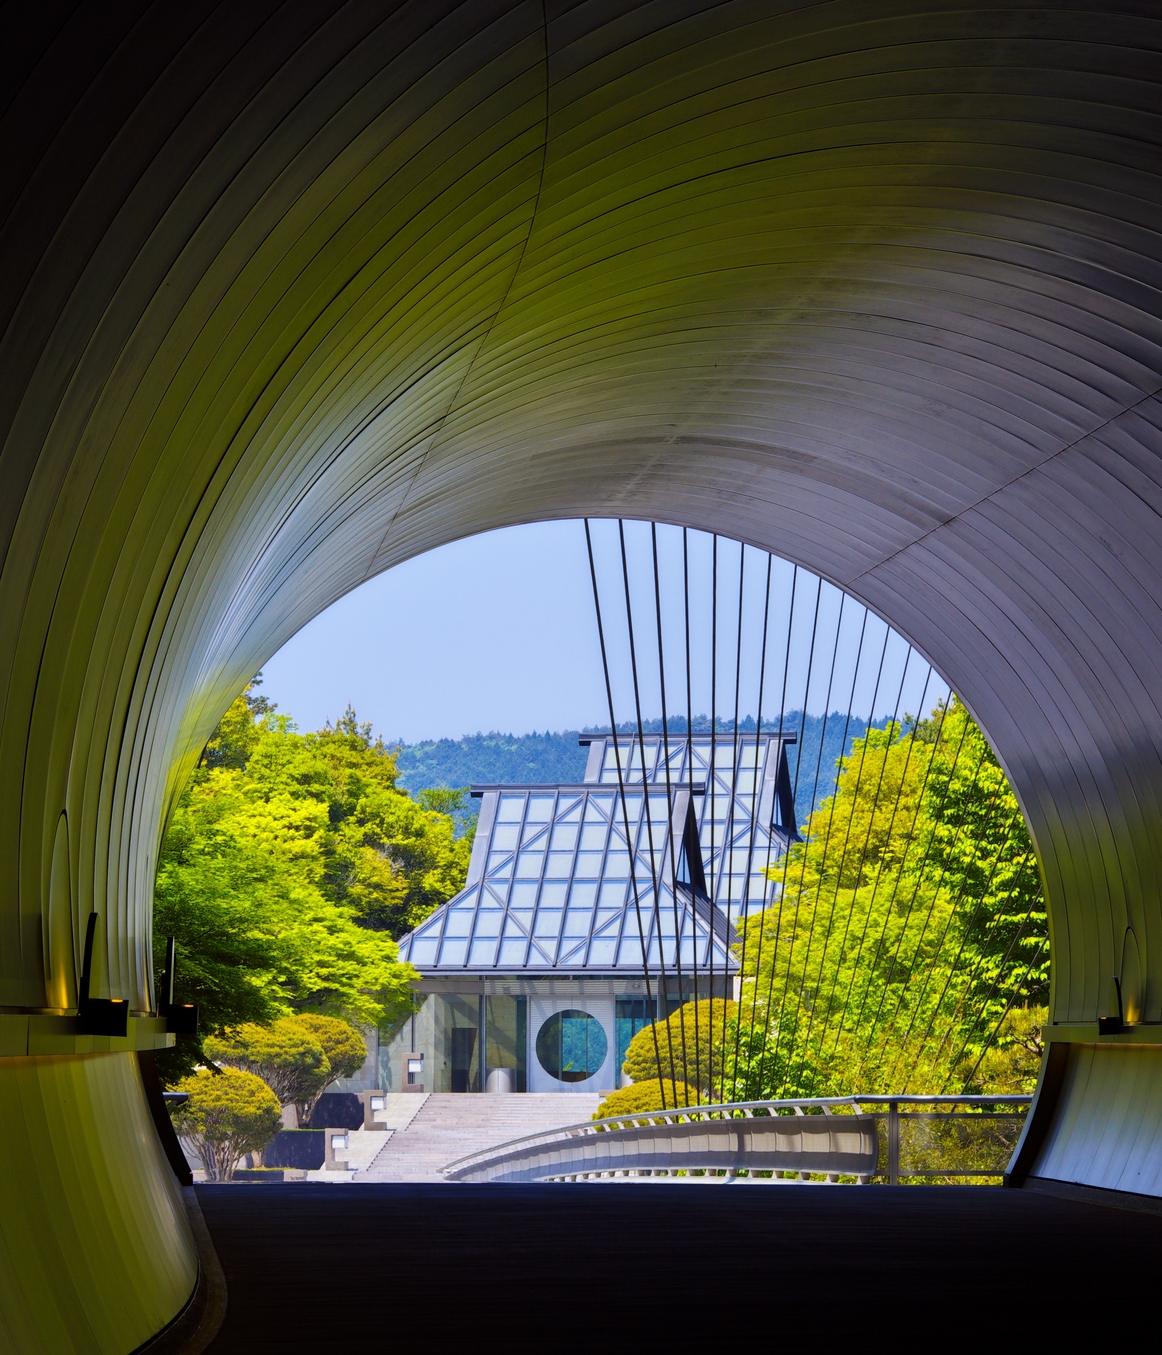 Approach – MIHO MUSEUM【確認用デモ】